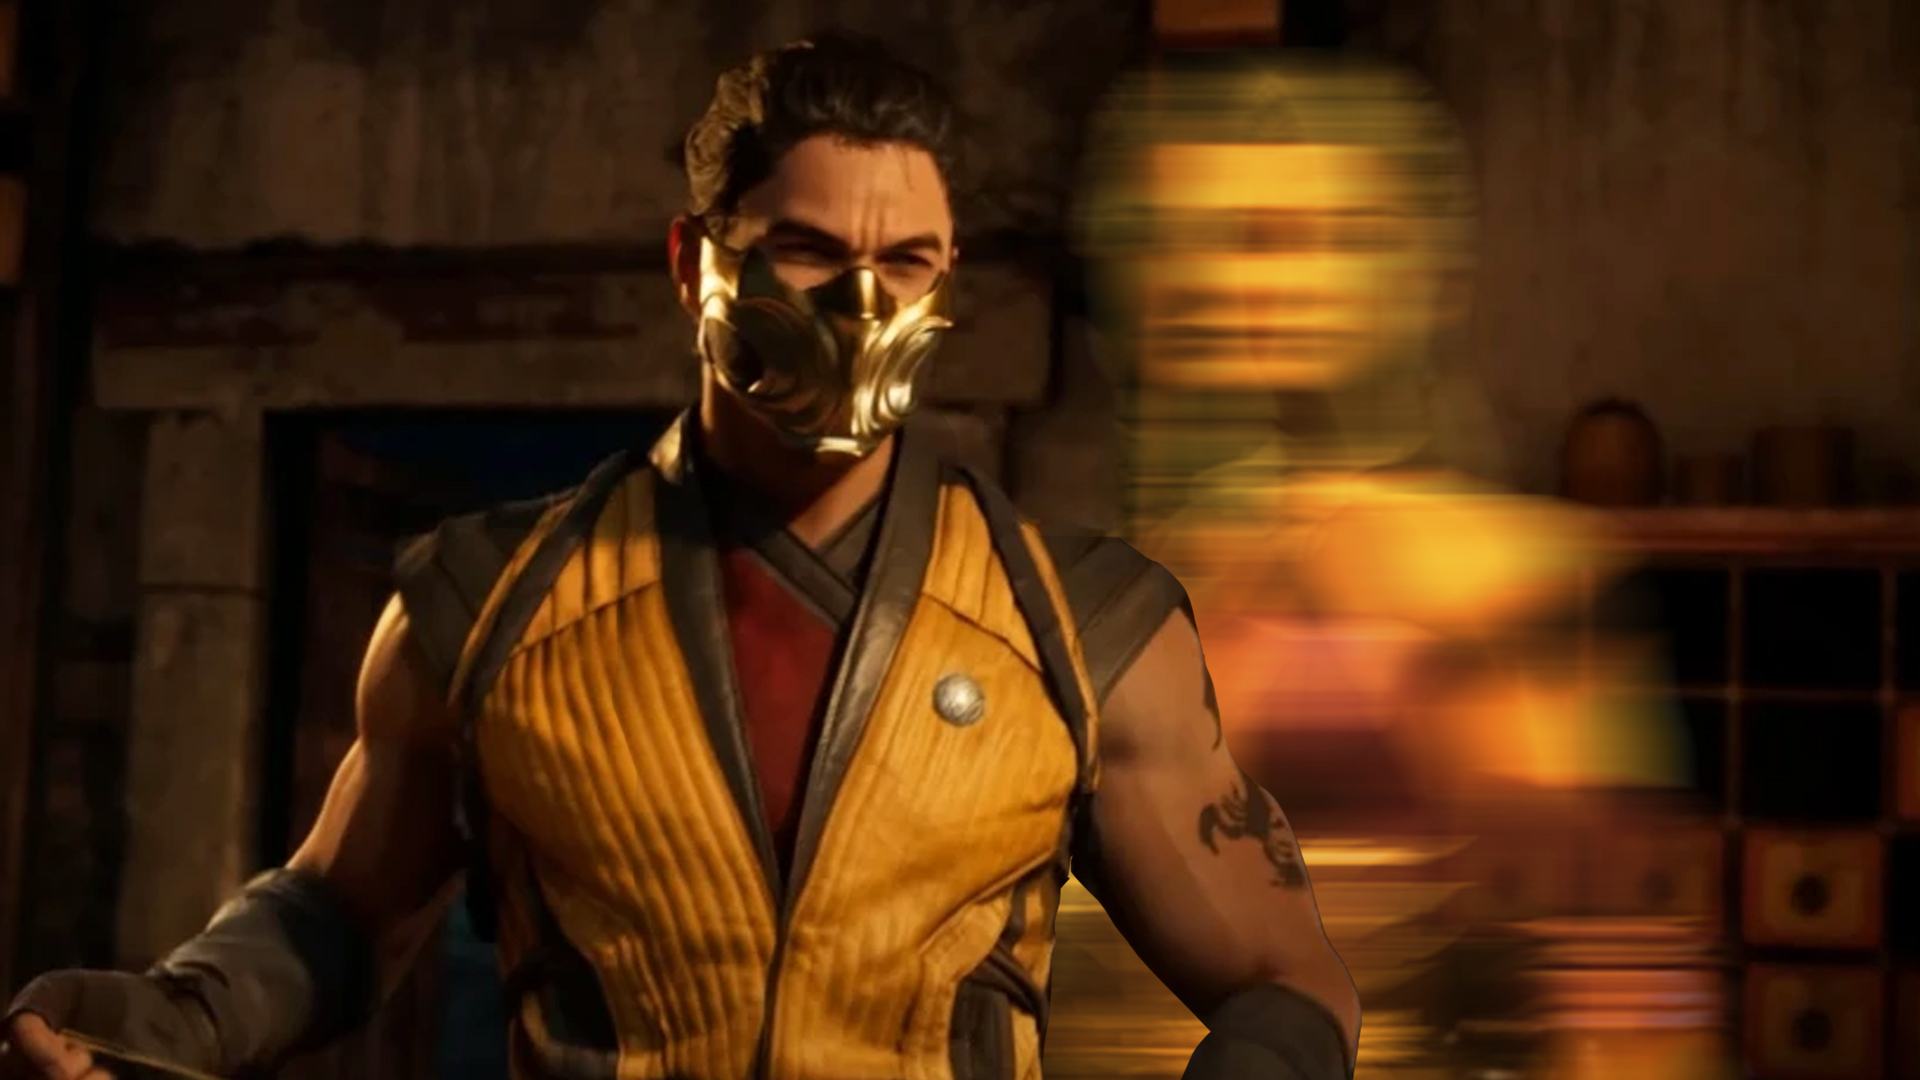 Mortal Kombat 1's first gameplay had hidden details and roster